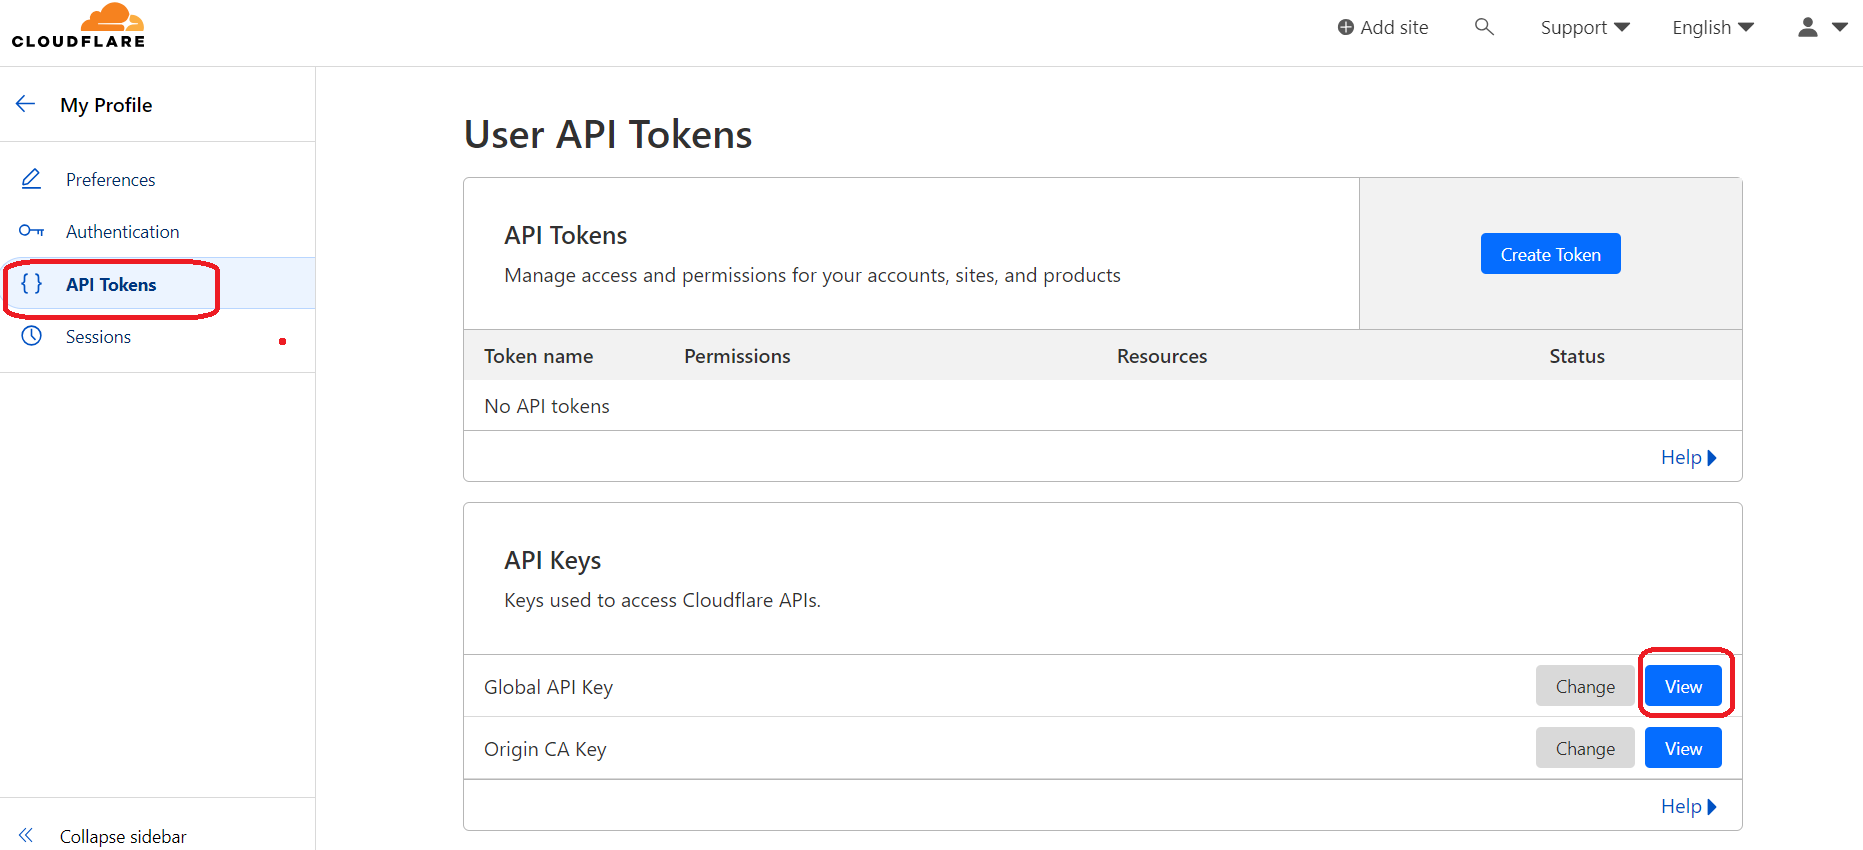 Navigate to the 'Global API Key' section and click 'View' to reveal your API key